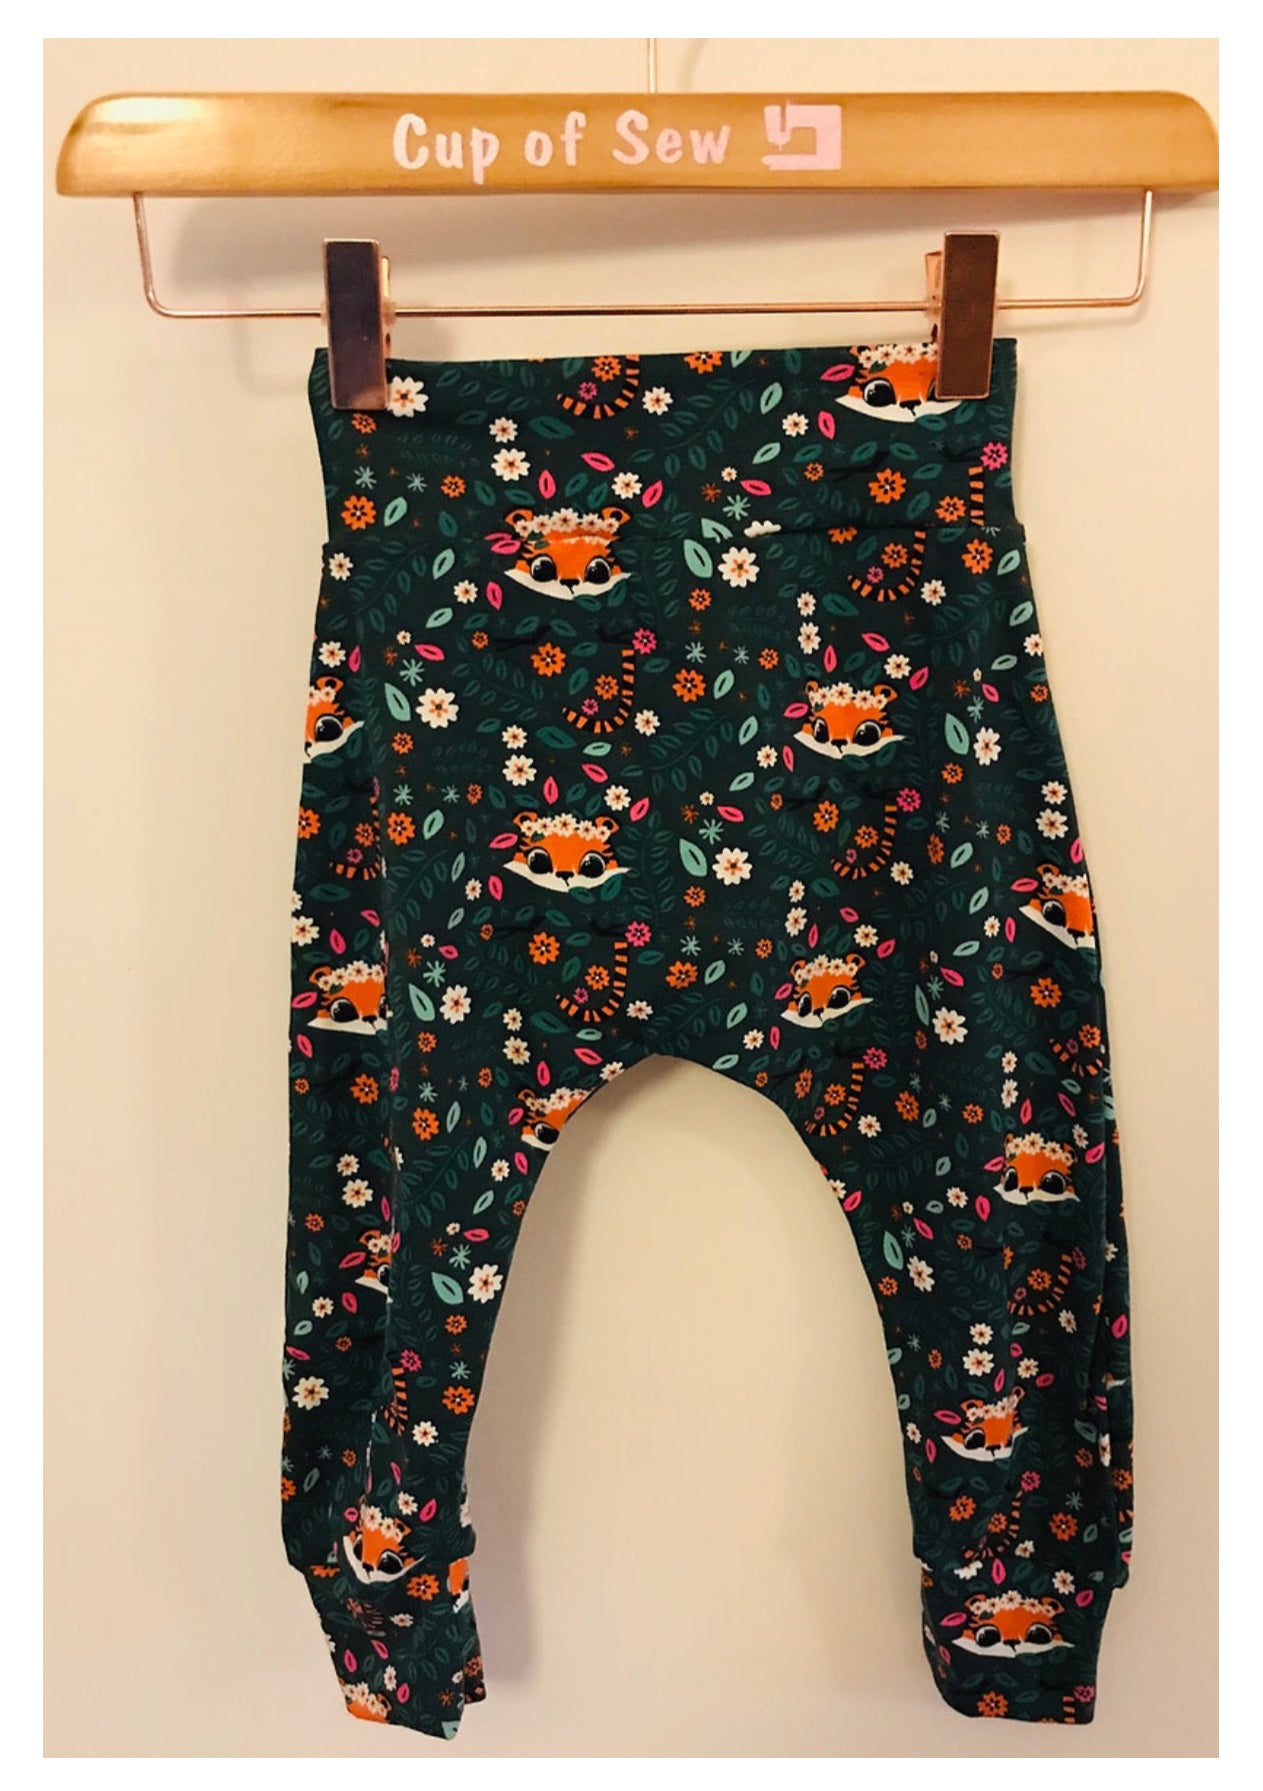 Baby Harem Leggings Hiding Tiger Print from Cup of Sew